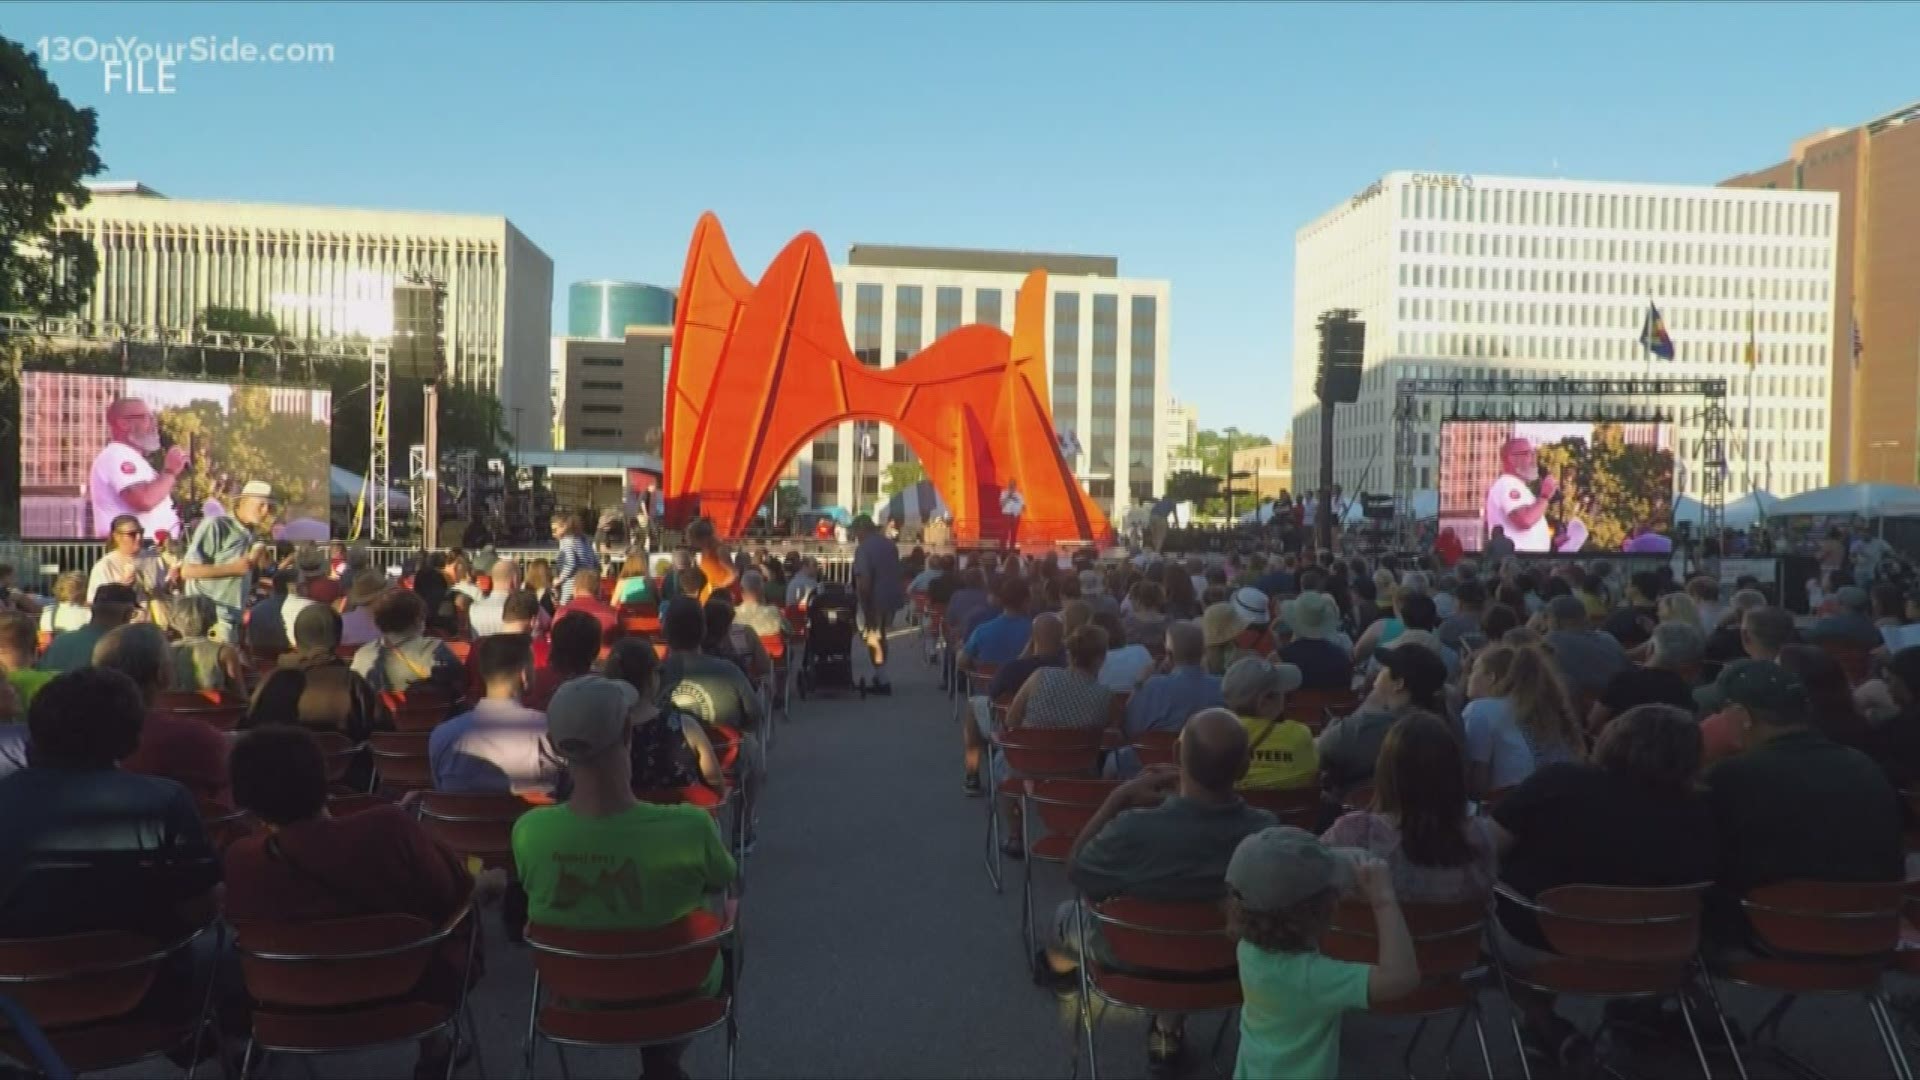 The 50-year tradition in downtown Grand Rapids has never been canceled before.